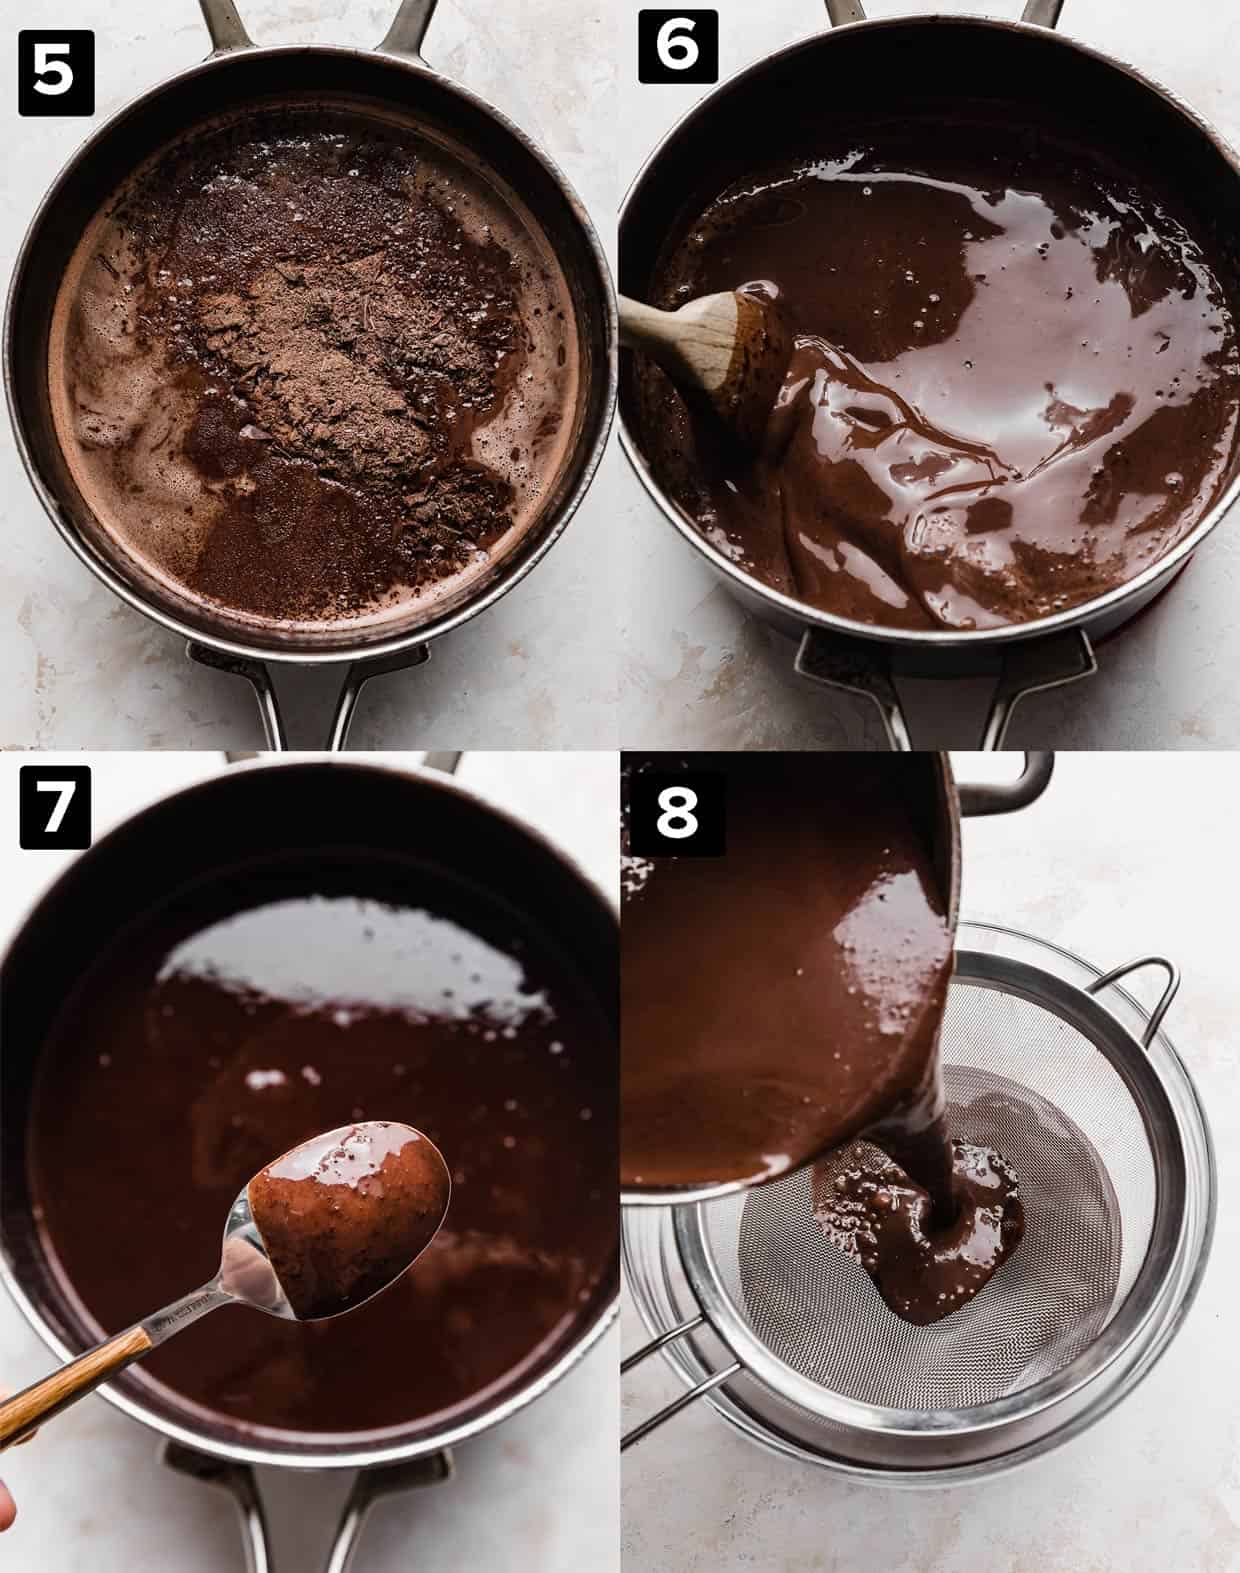 Four photos demonstrating how to make a rich and deep chocolate flavored ice cream.